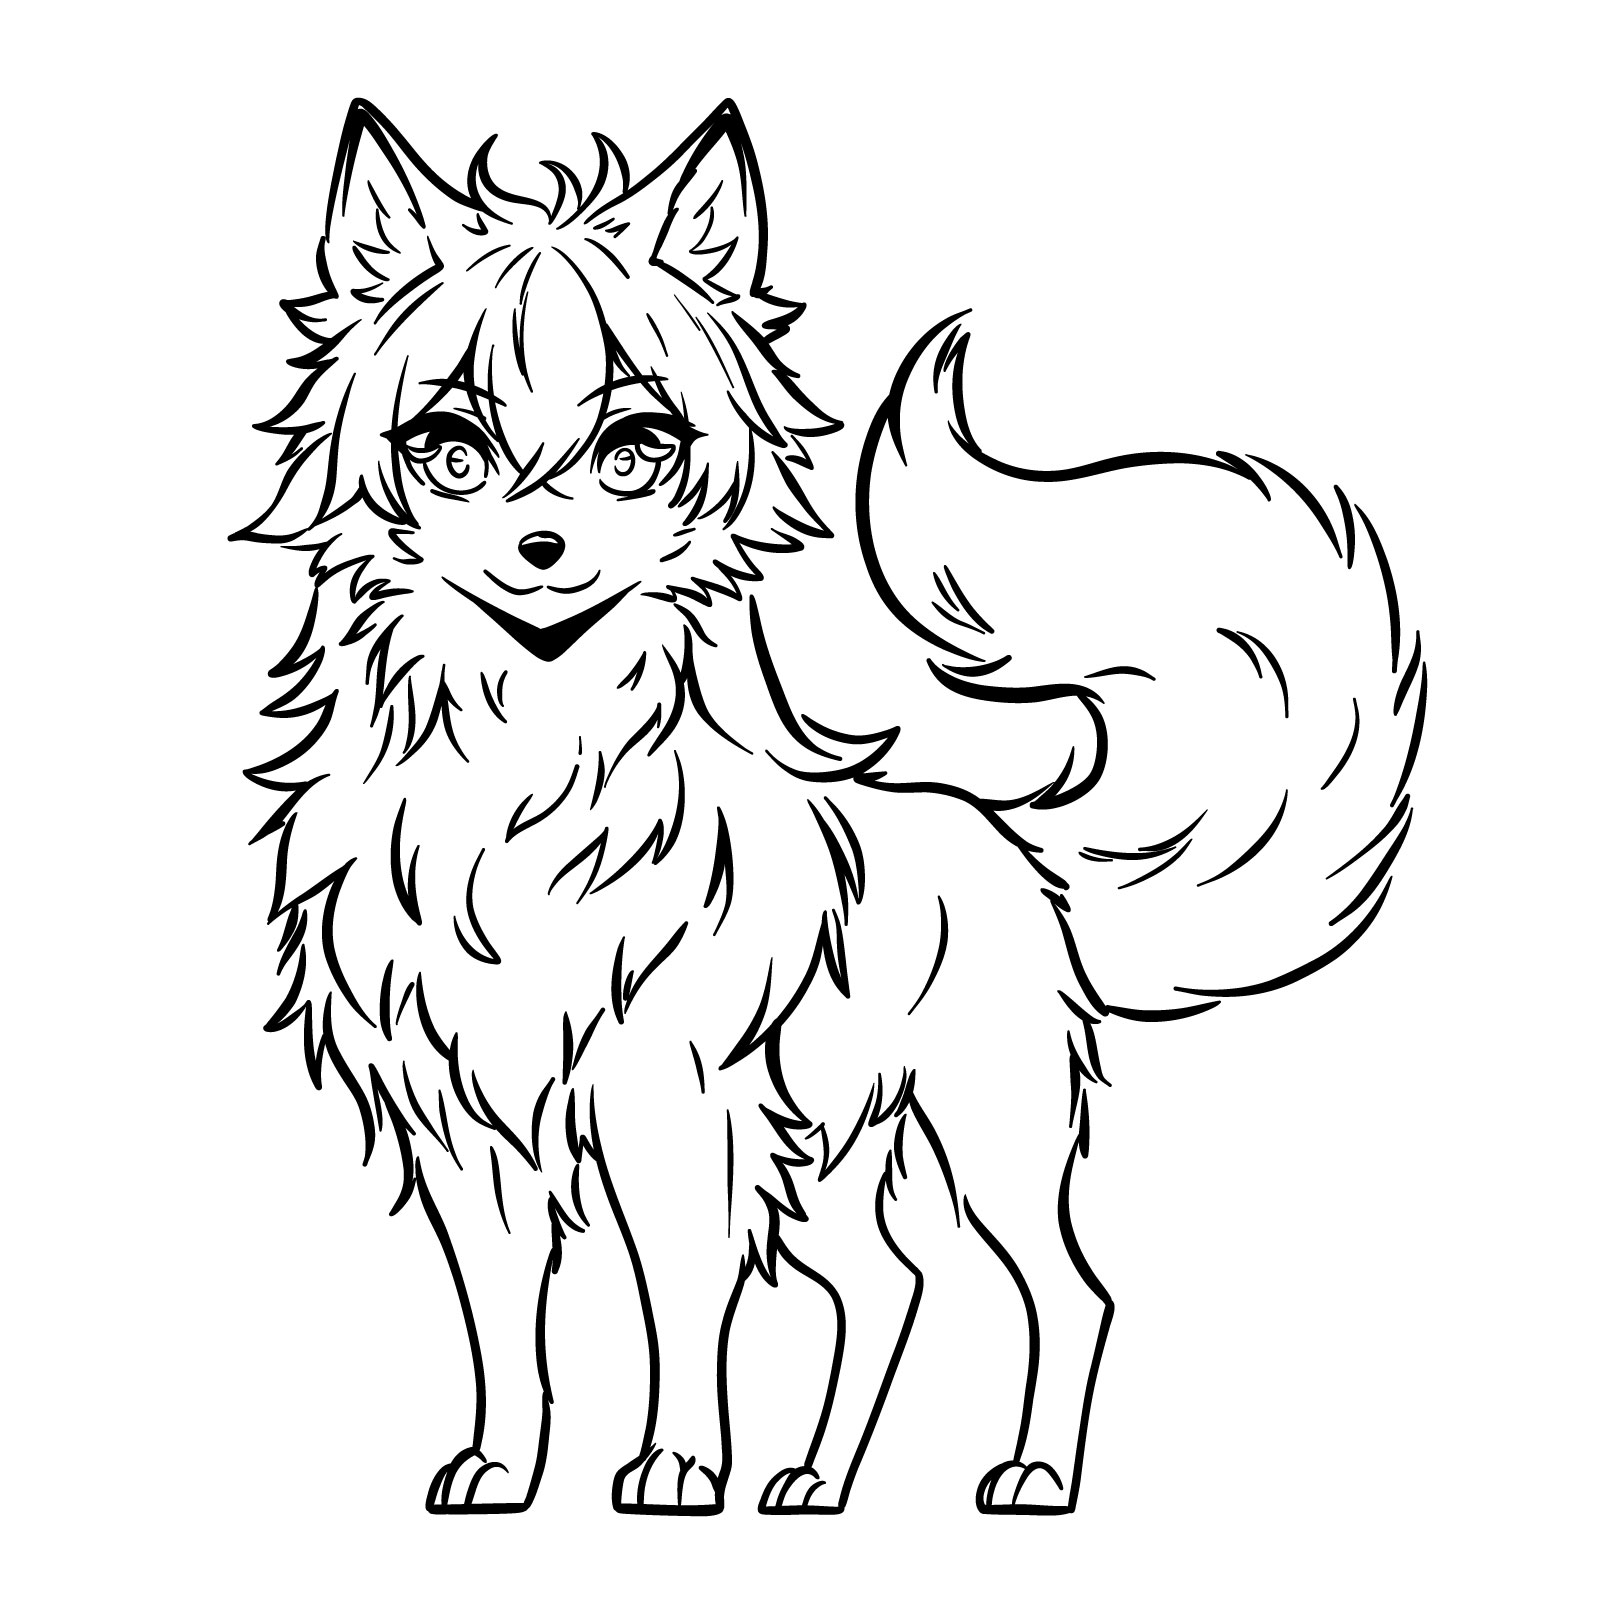 How to draw an Anime Wolf in easy steps